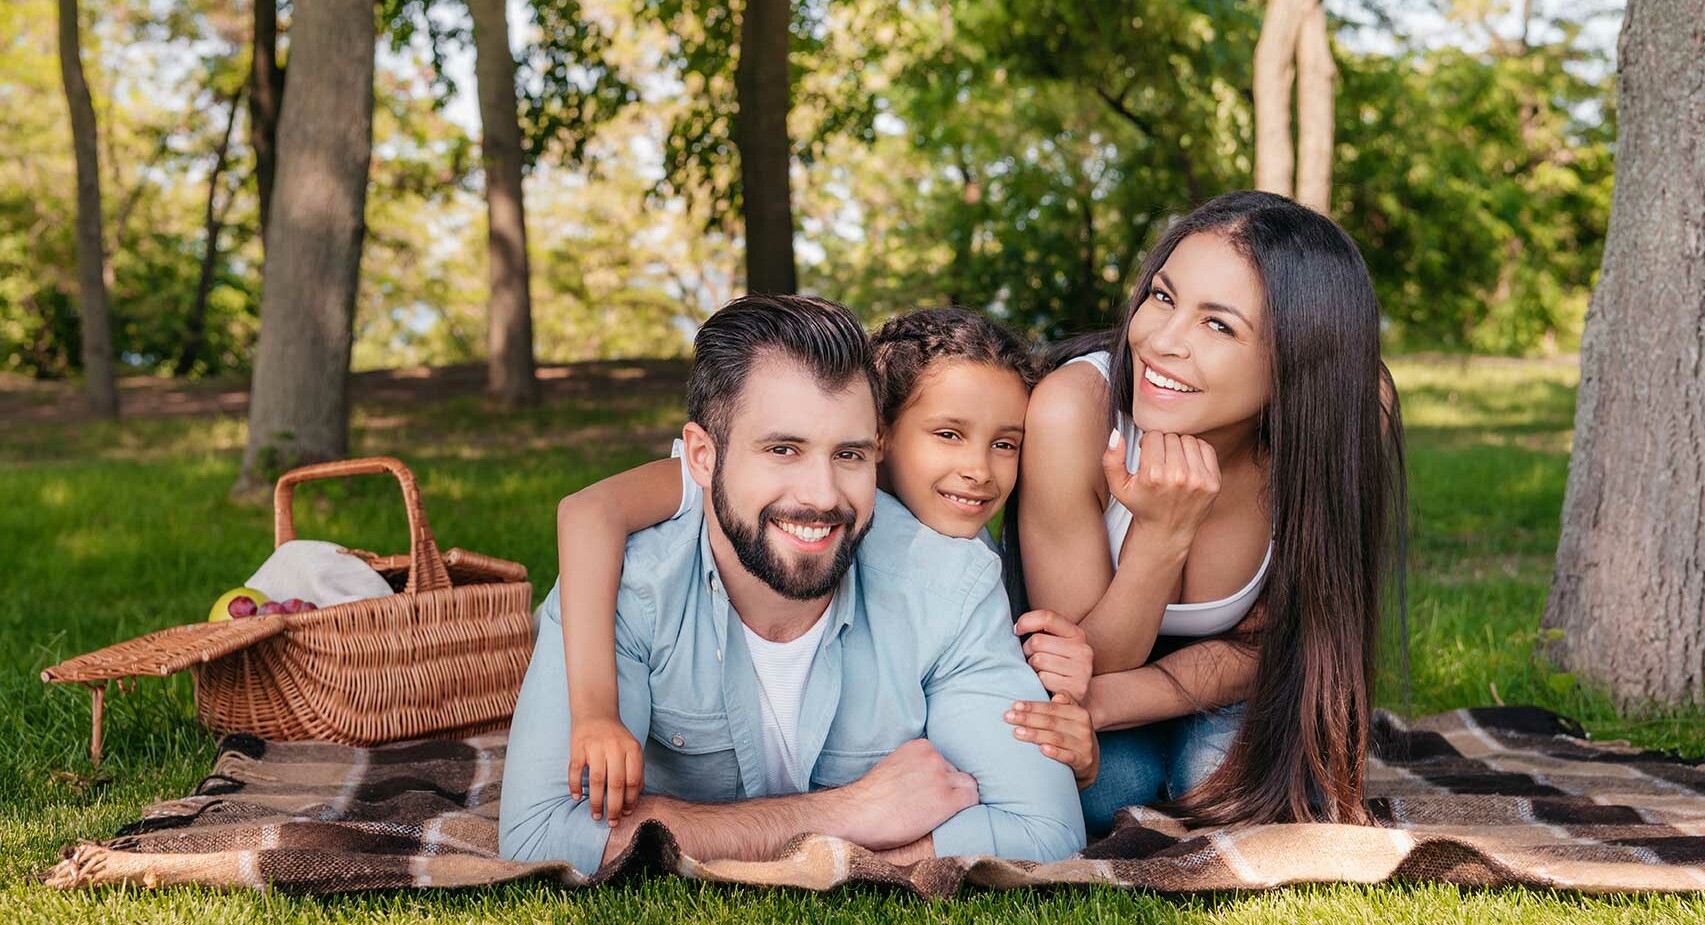 A healthy, happy family of three, consisting of a father, mother, and a child, enjoying a picnic outdoors, smiling contentedly.